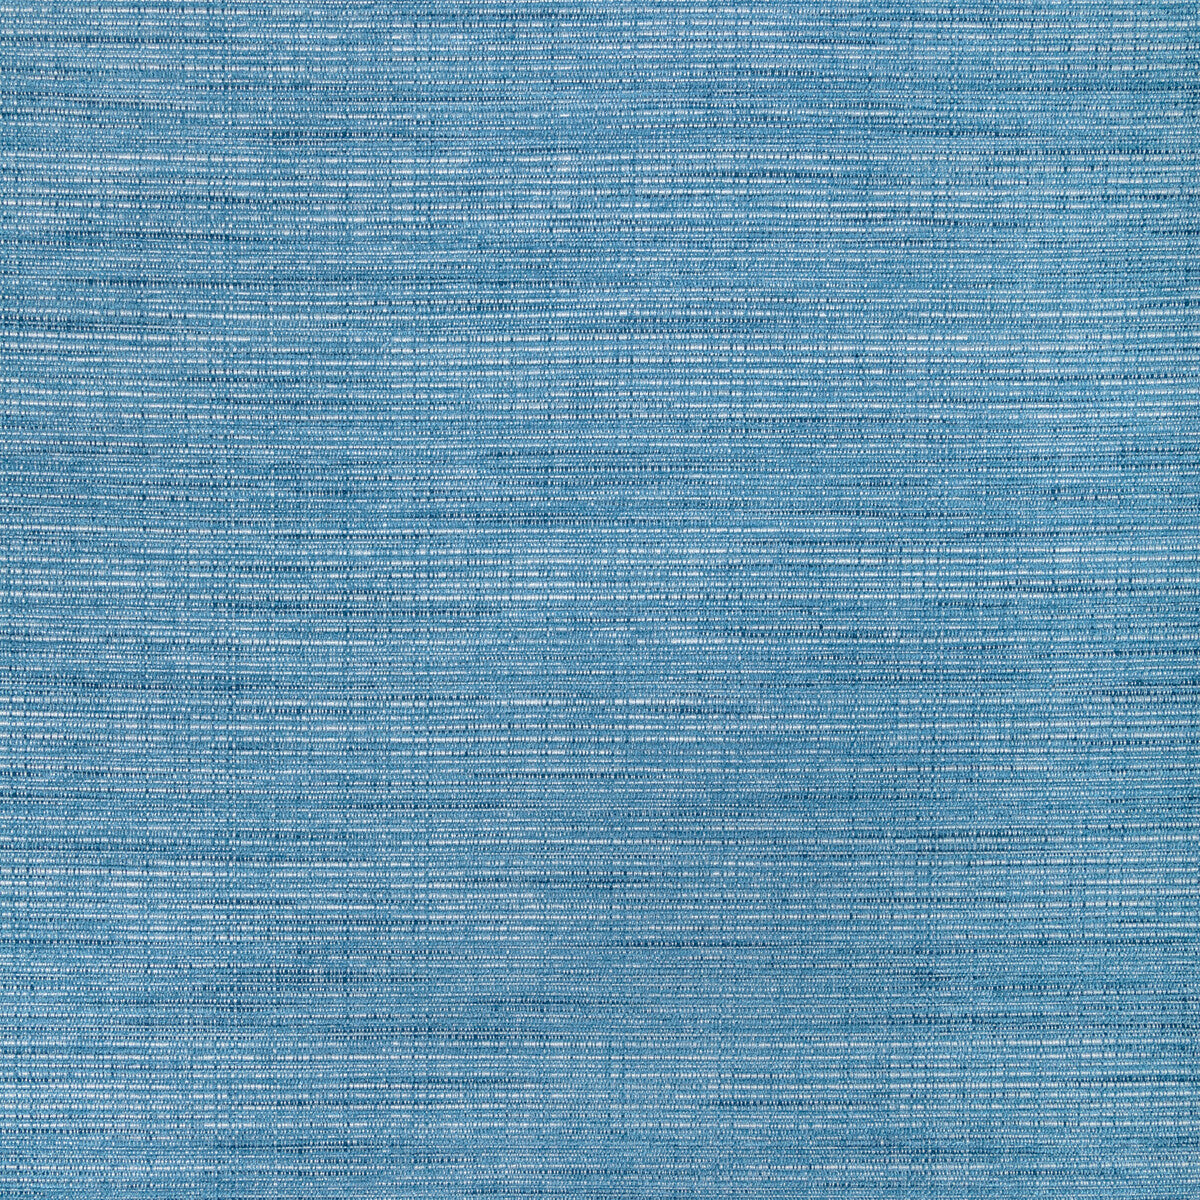 Patrasso fabric in chambray color - pattern 36374.5.0 - by Kravet Basics